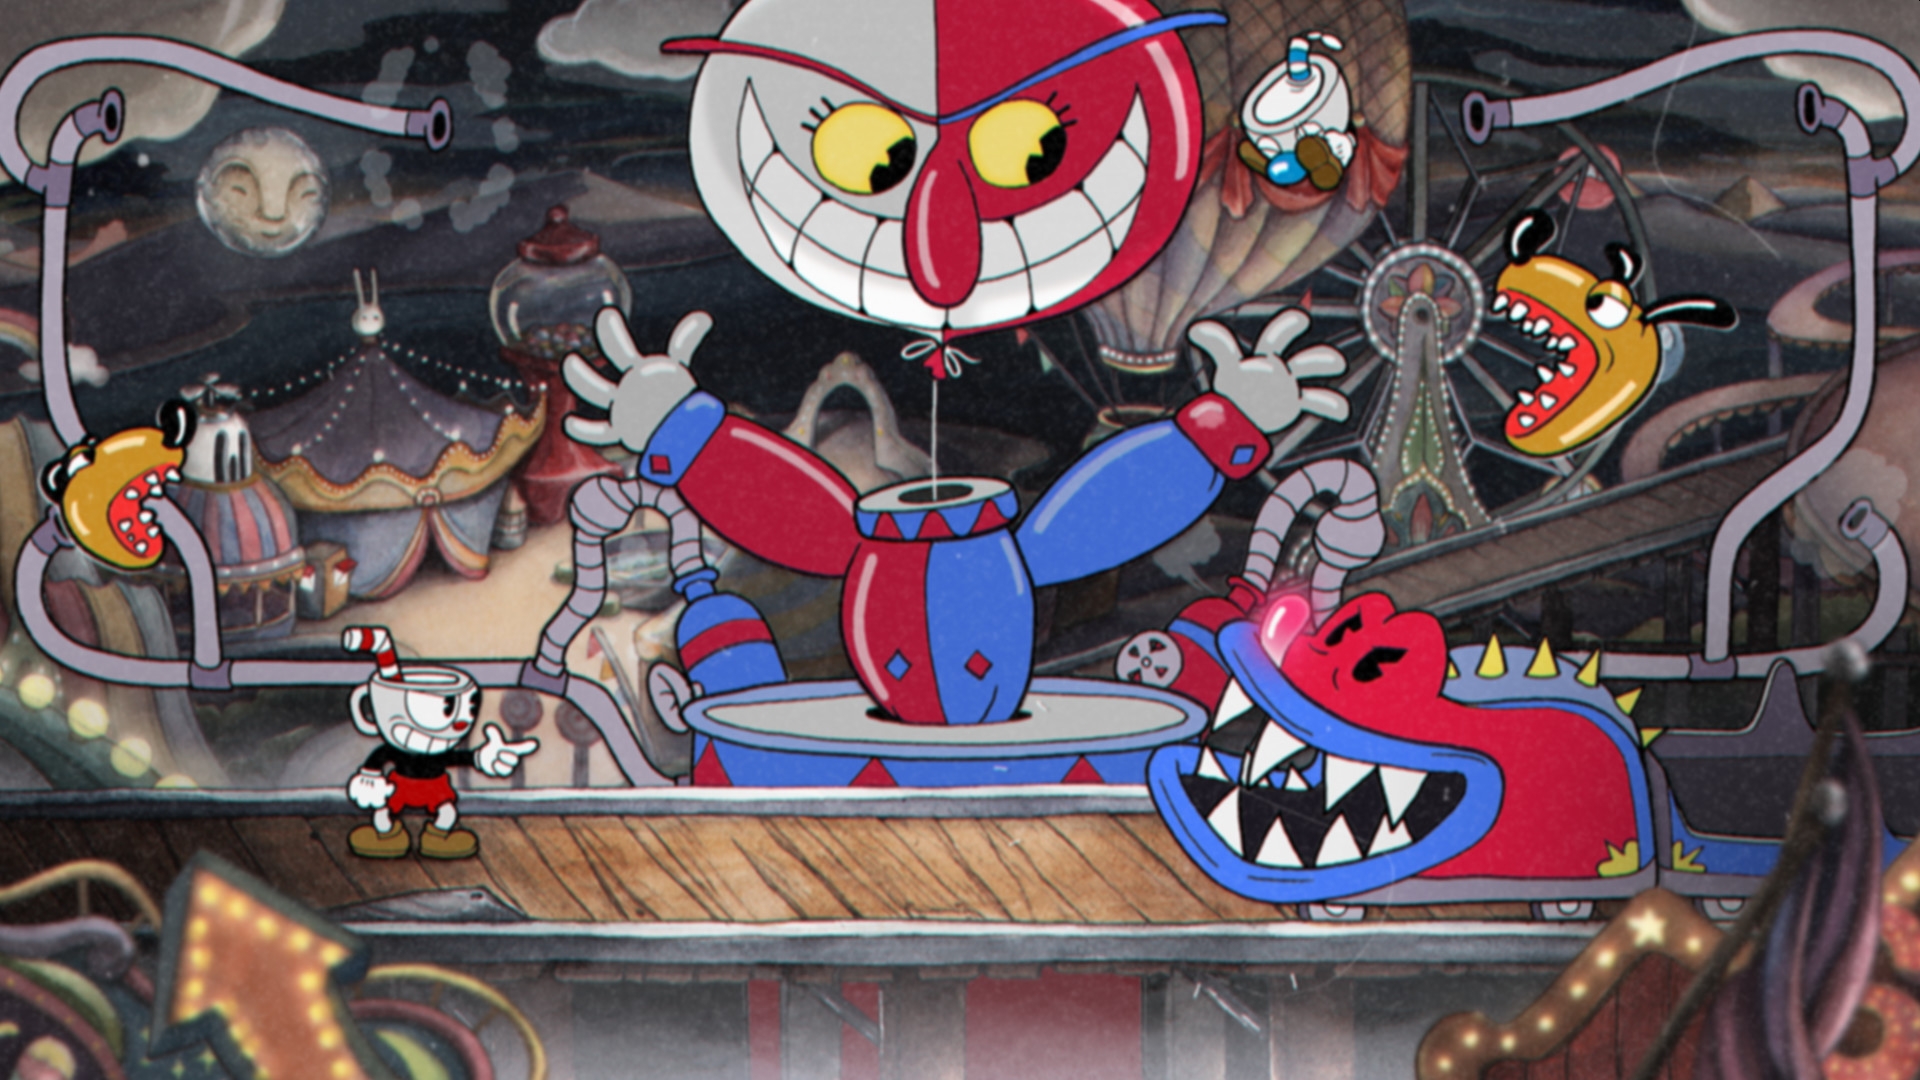 Studio MDHR Announces Cuphead Toys Are Now Available In Arby’s Kids Meals